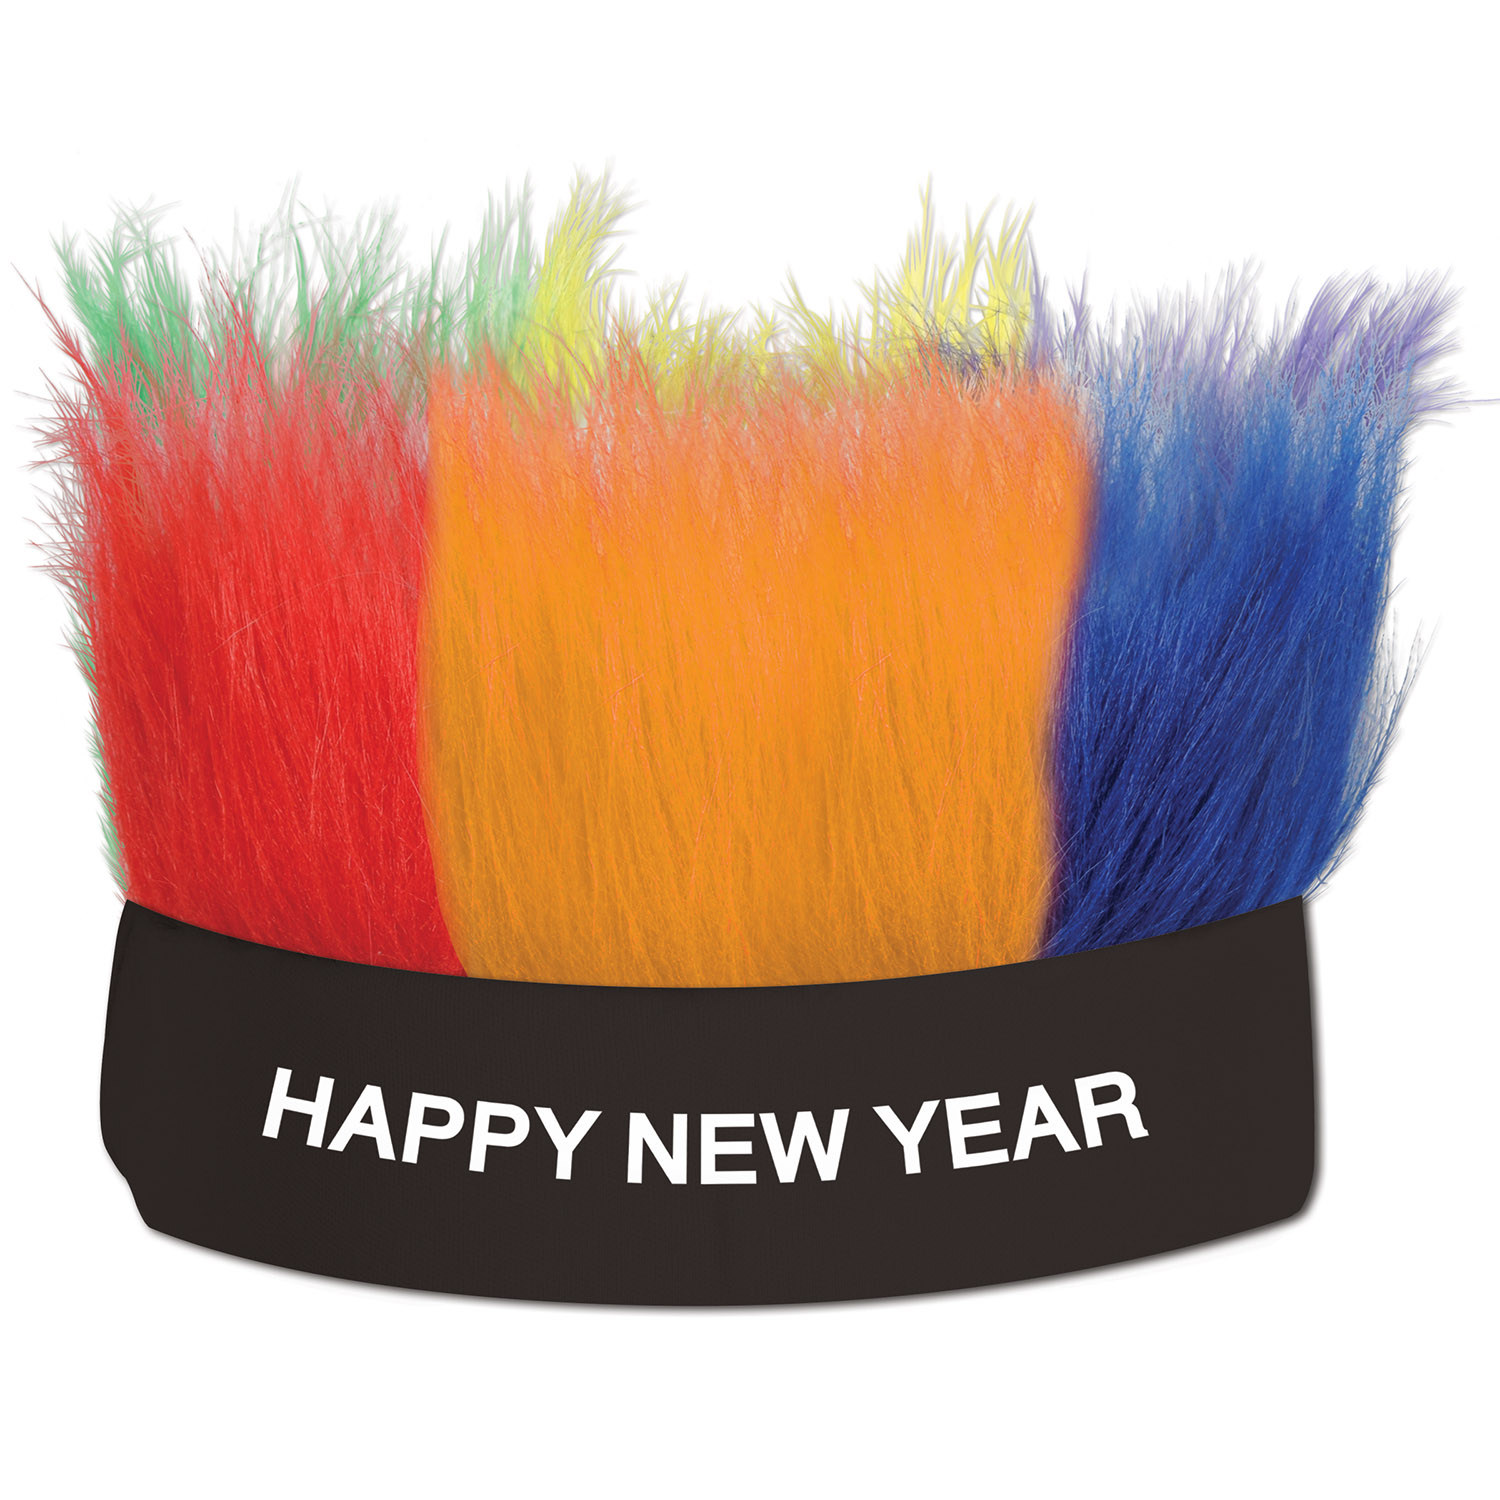 Black headband that reads "Happy New Year" in white and fun hair standing straight up in chunks of red, yellow, orange, green, blue and purple.